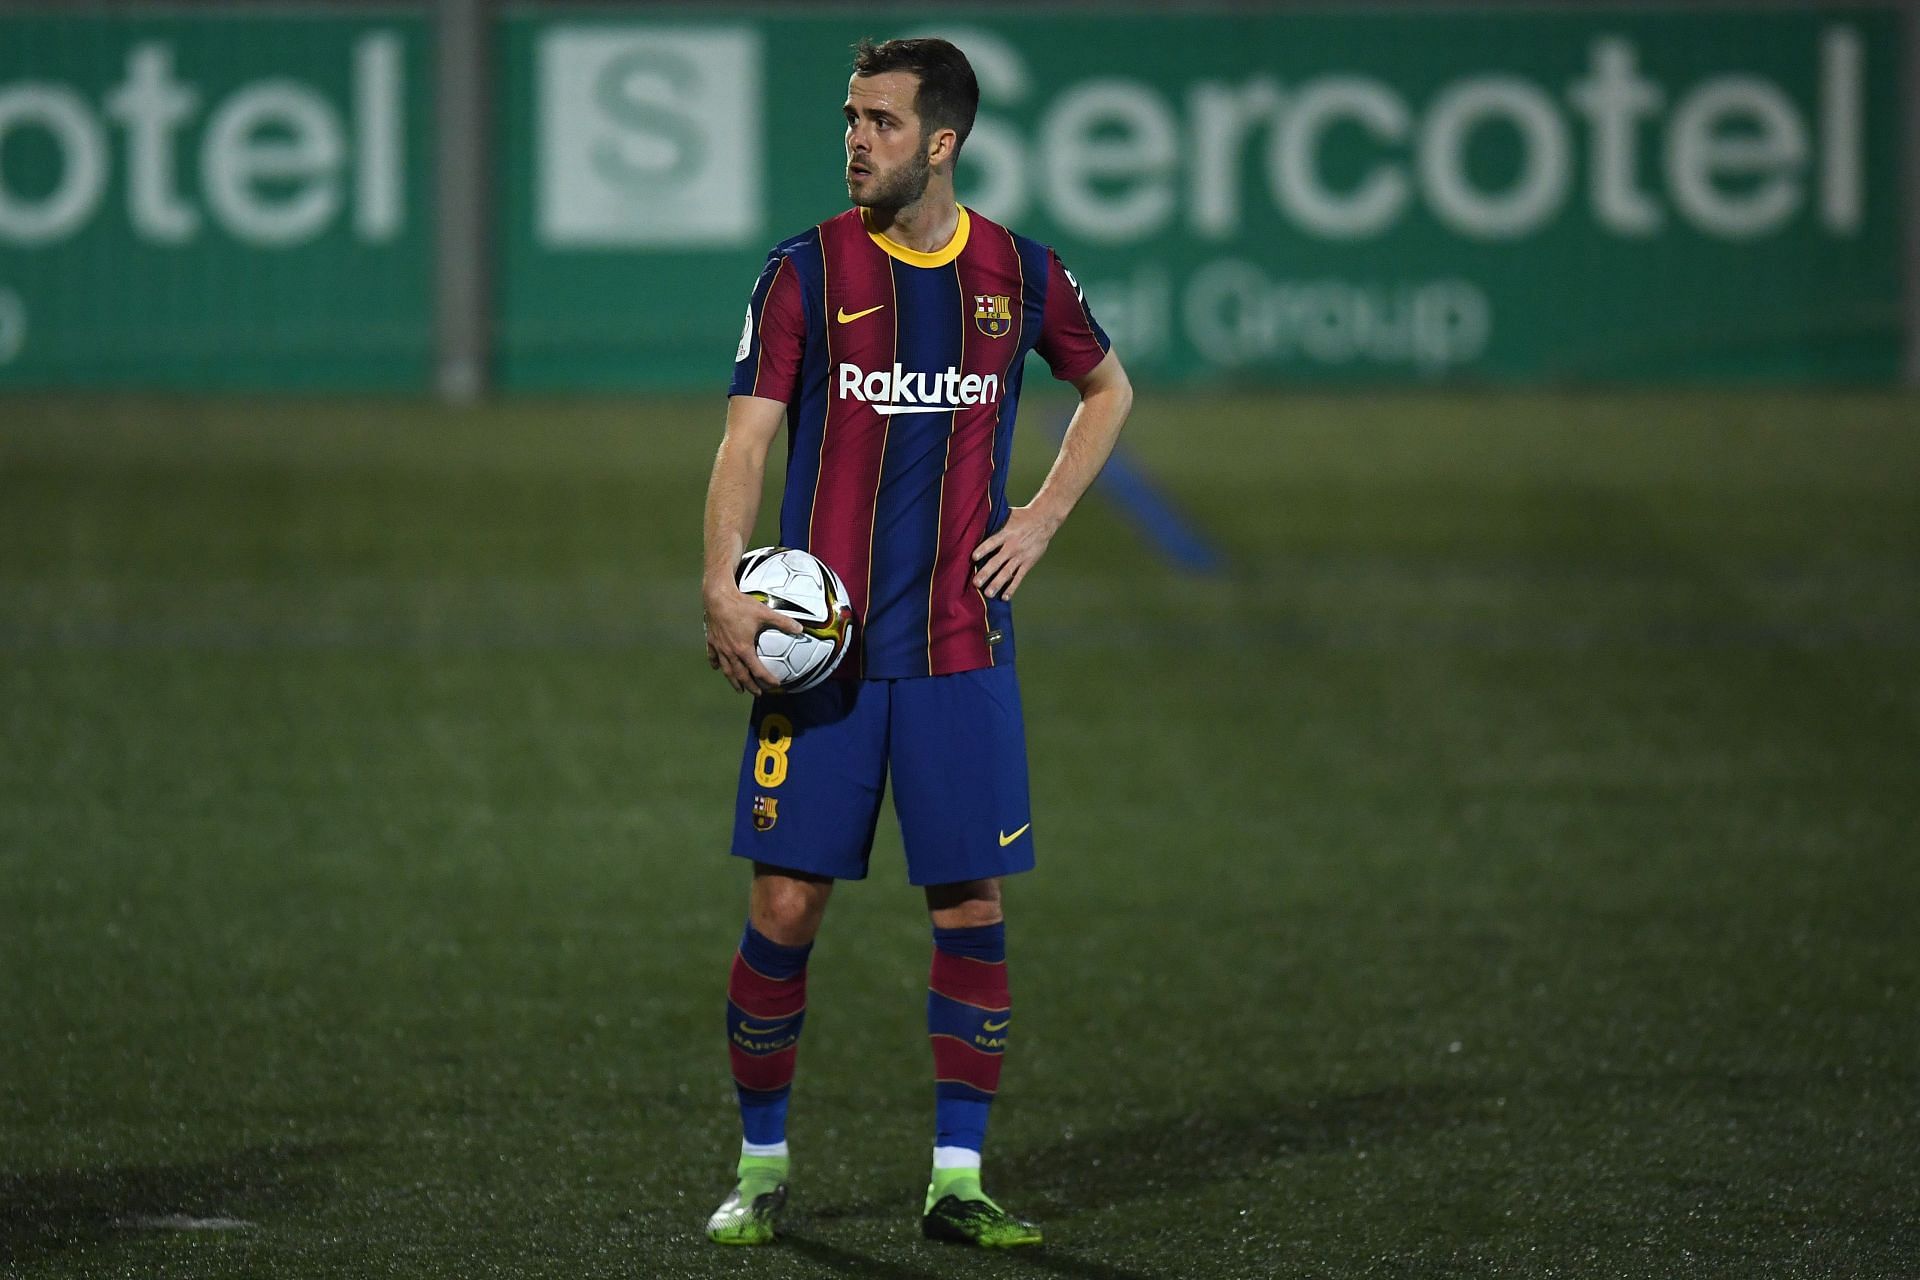 Pjanic might not have a future at Barcelona